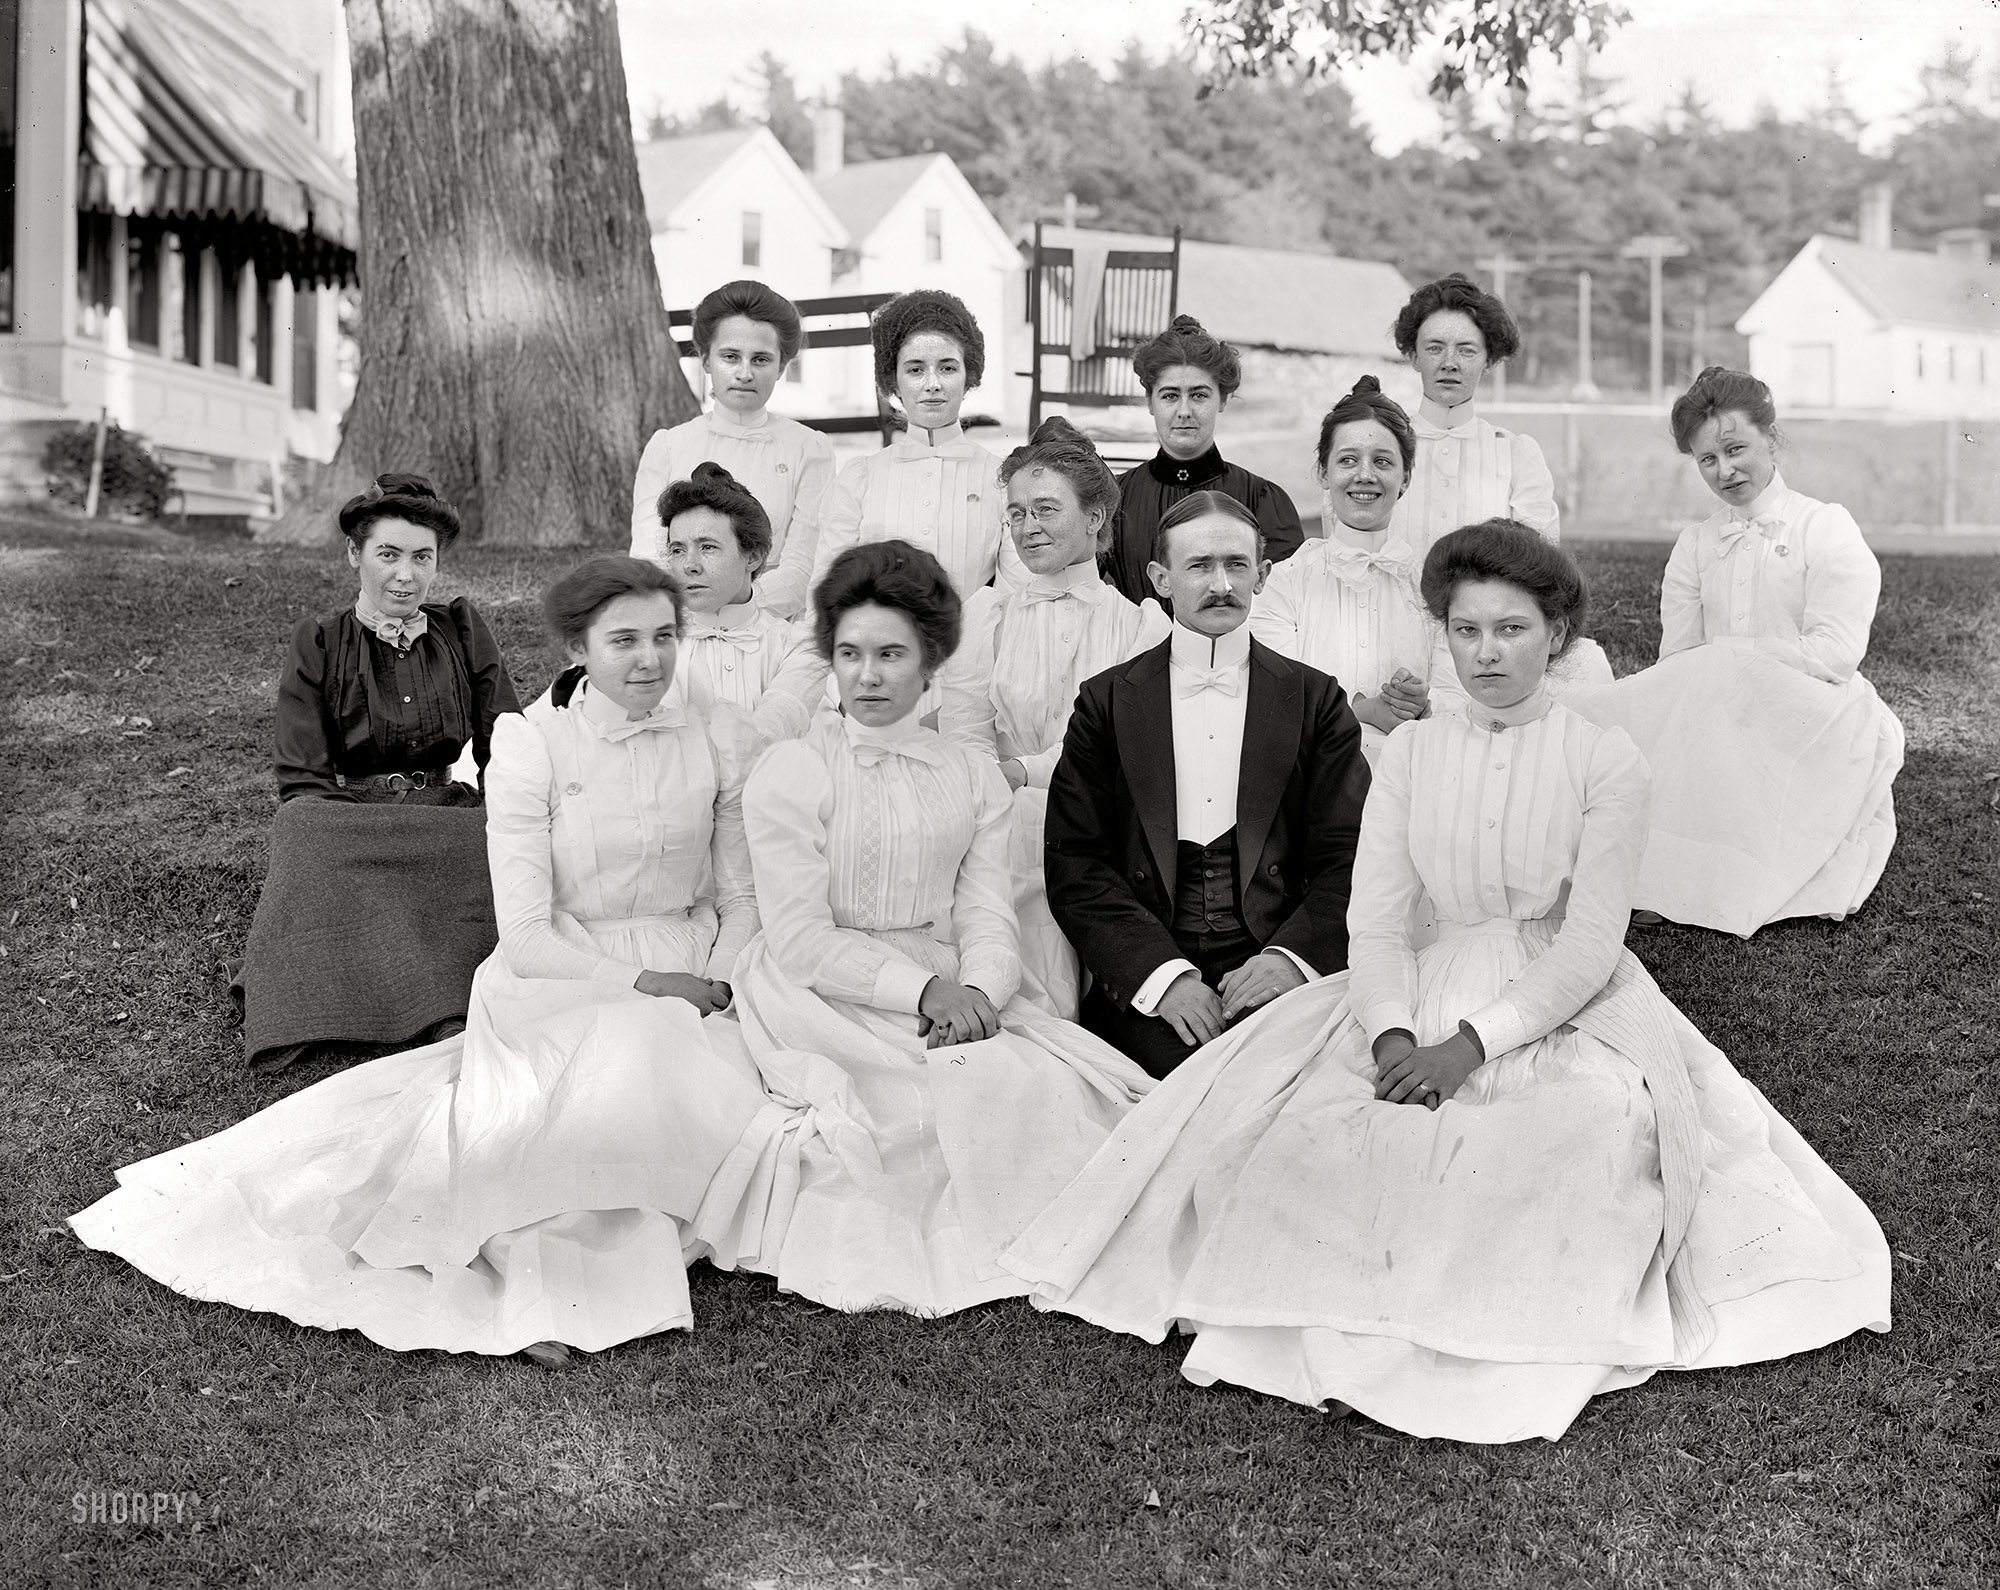 Poland Spring, Maine, circa 1900. "At the Mansion House -- hotel staff." 8x10 inch dry plate glass negative, Detroit Publishing Company. View full size.